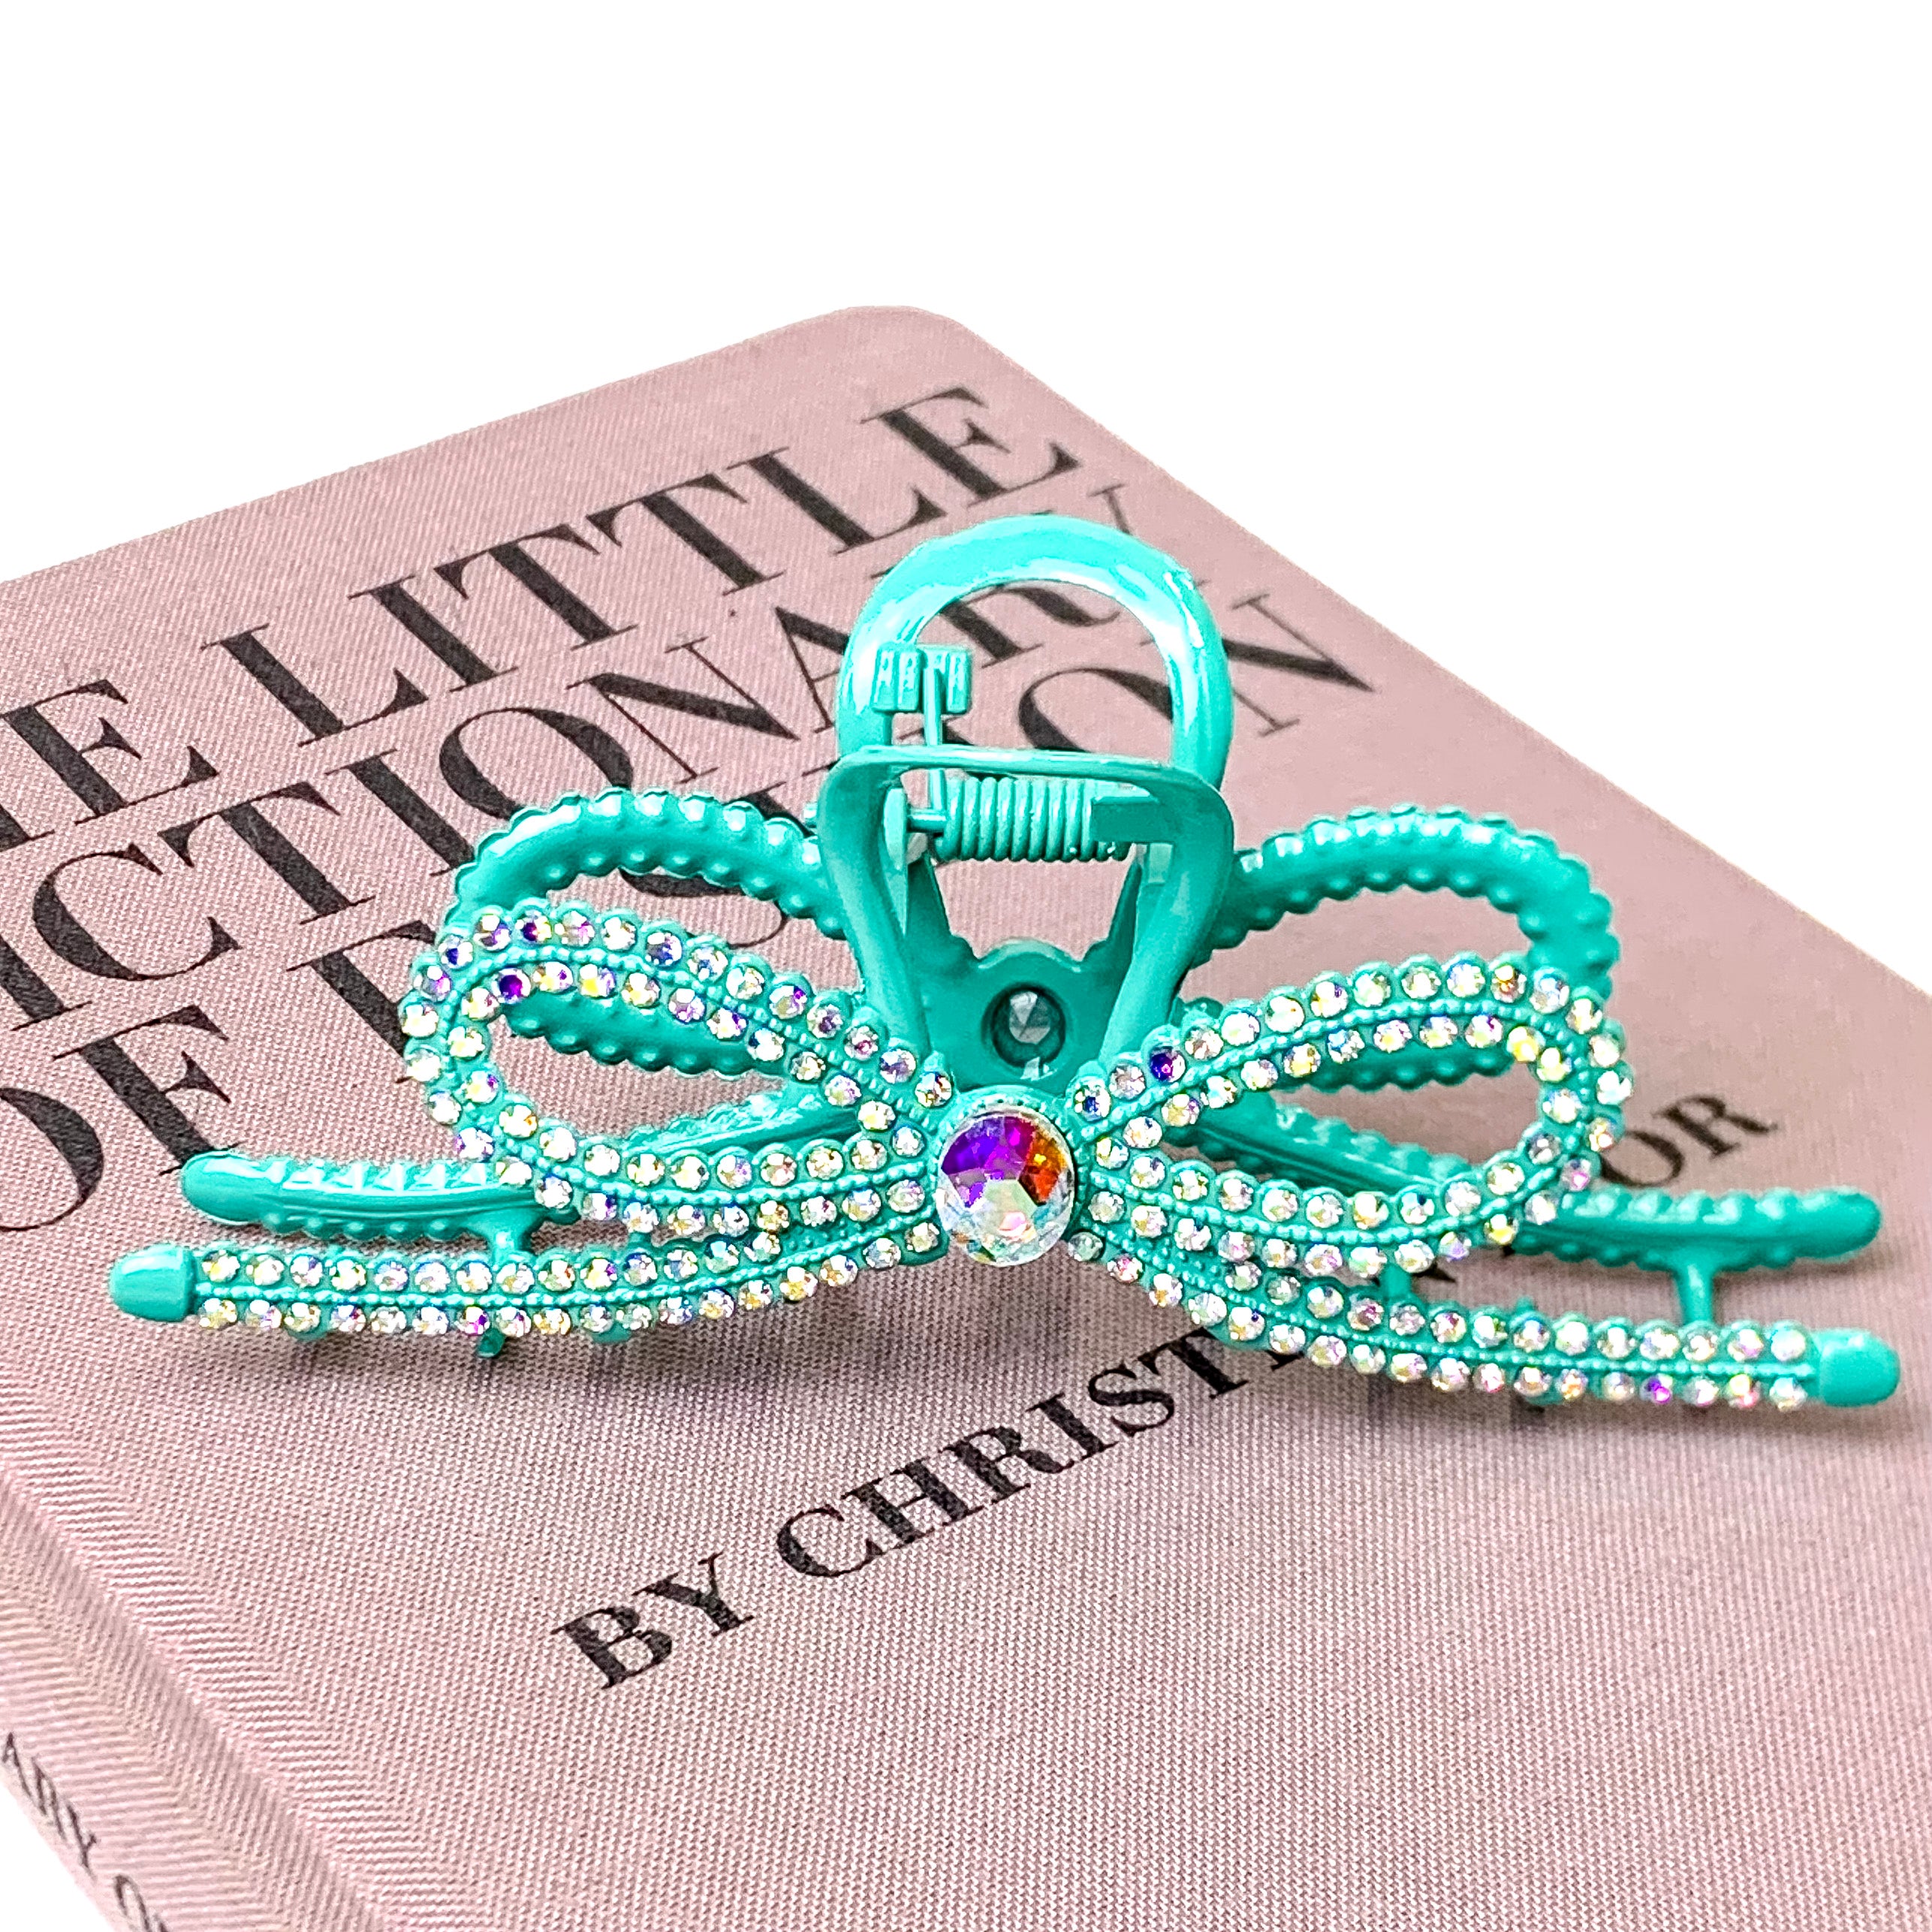 AB Crystal Embellished Ribbon Shaped Metal Hair Clip in Turquoise Blue - Giddy Up Glamour Boutique